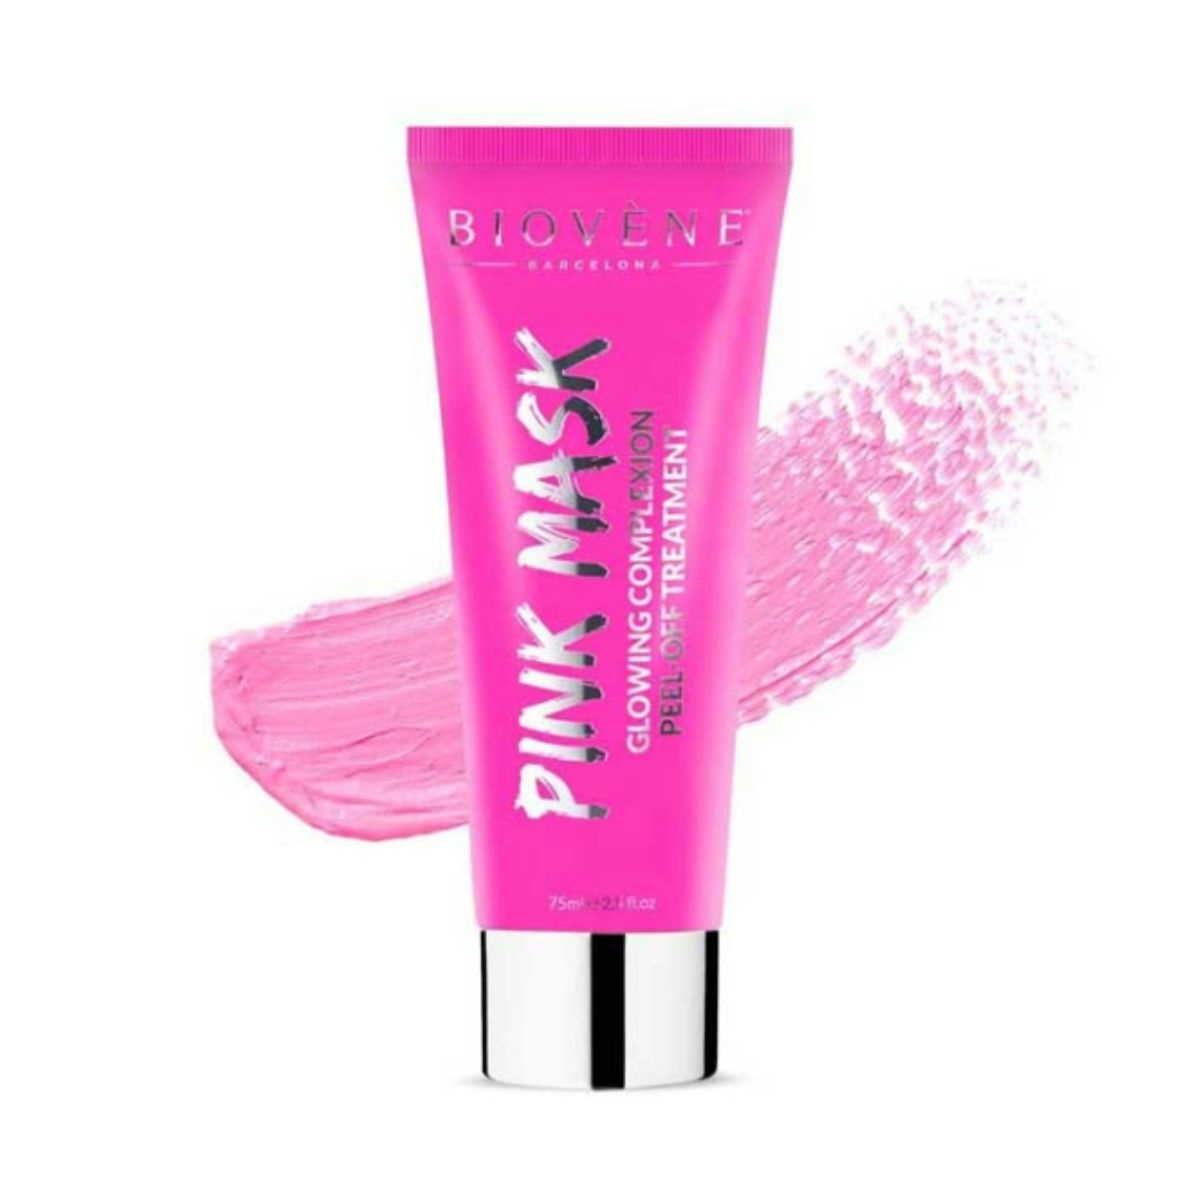 Mascara Glowing Complexion Peel-Off Treatment